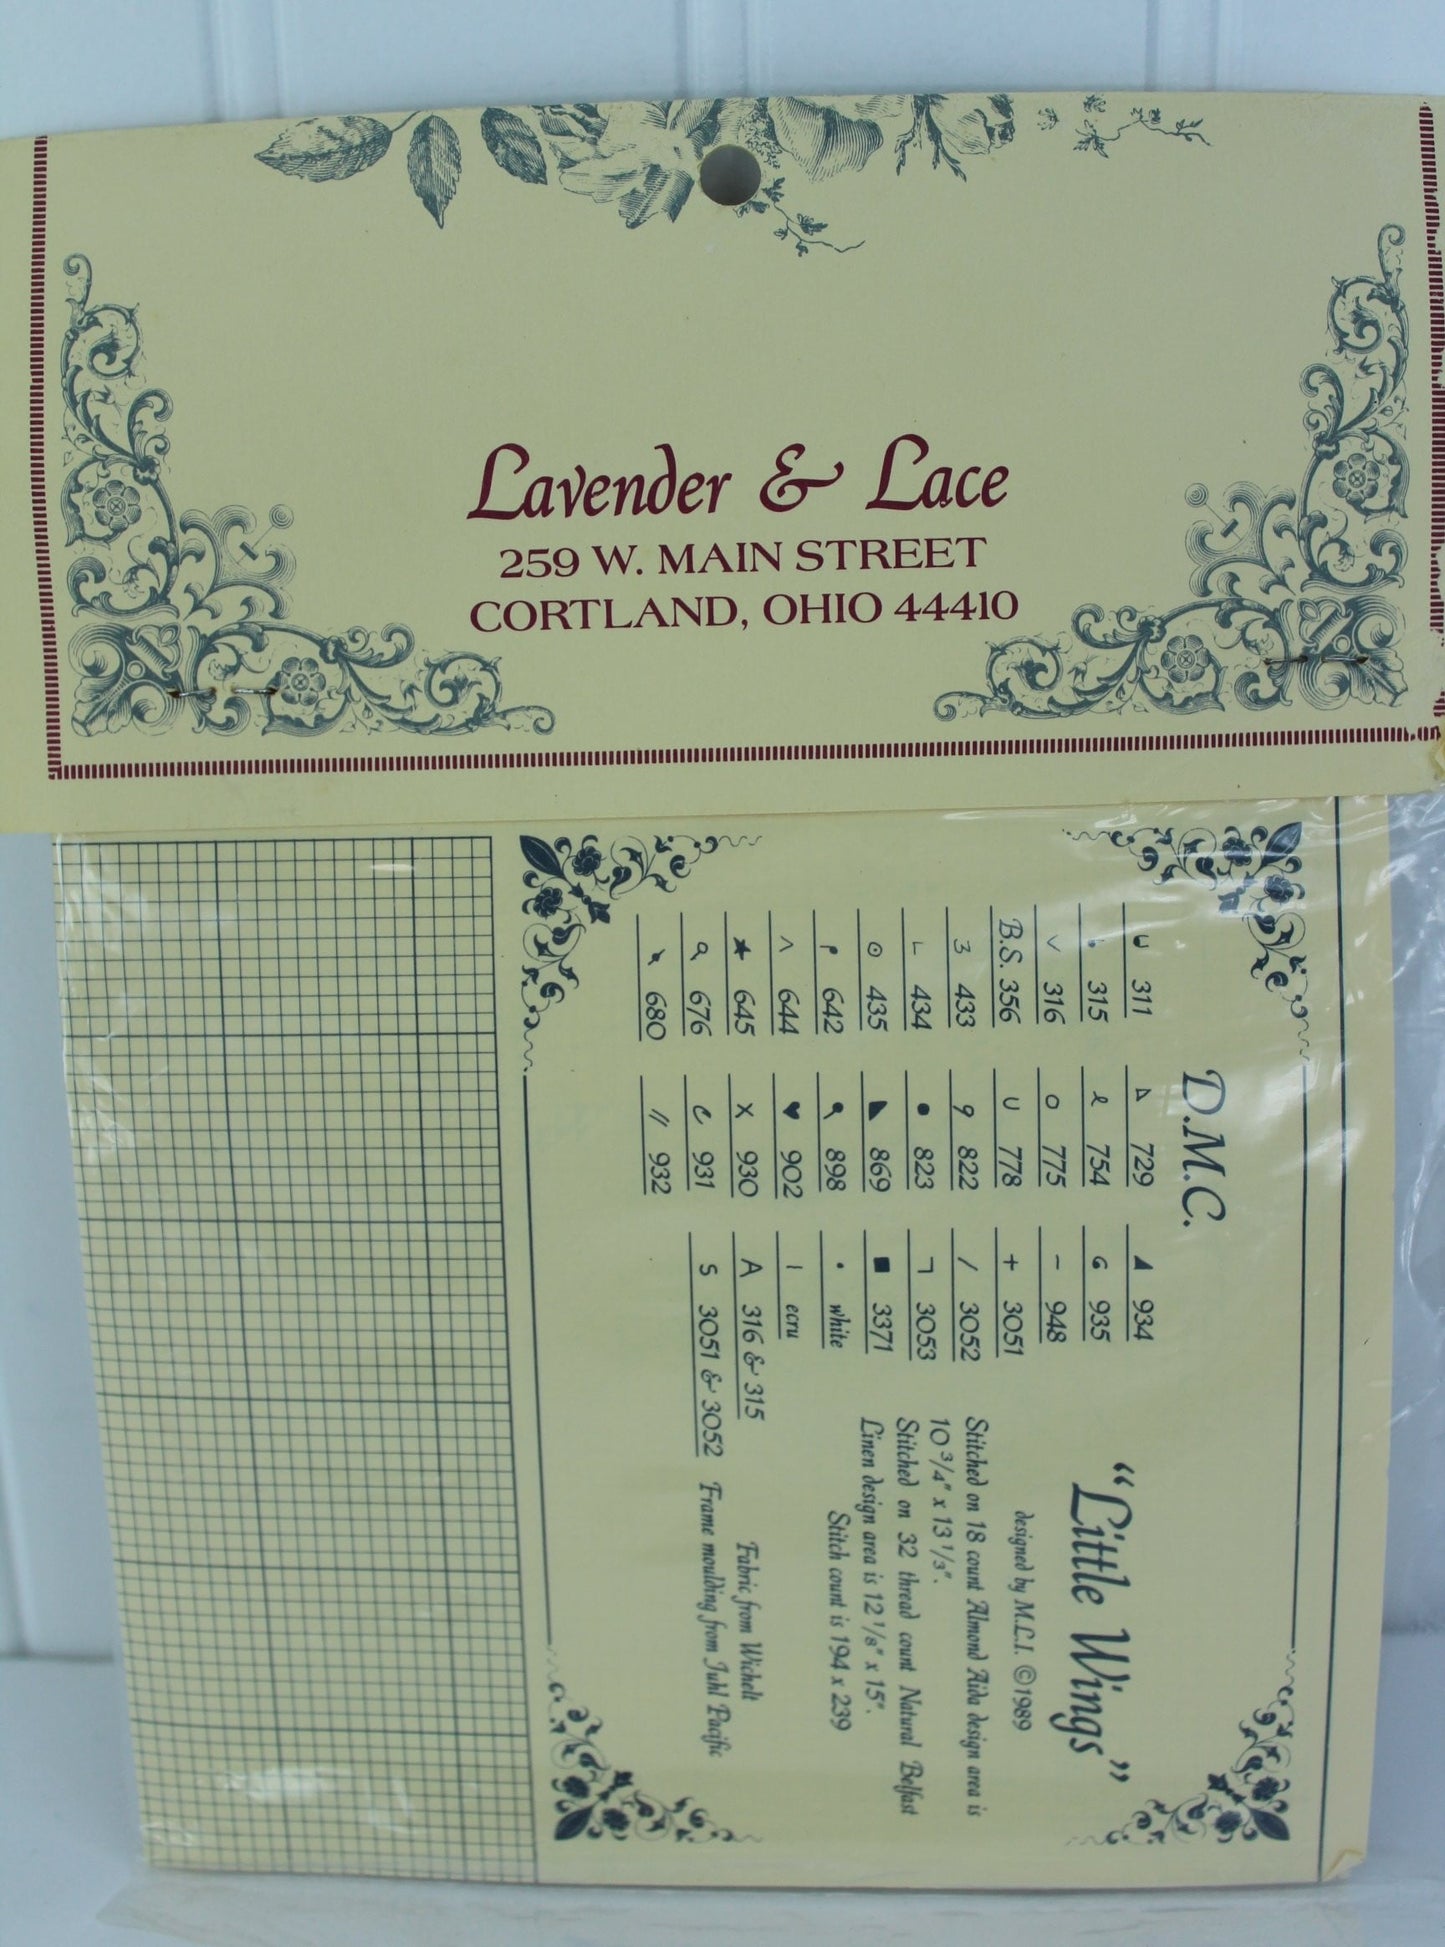 Lavender & Lace Cross Stitch "Little Wings" Pattern Chart Vintage New 1989 includes DMC thread numbers